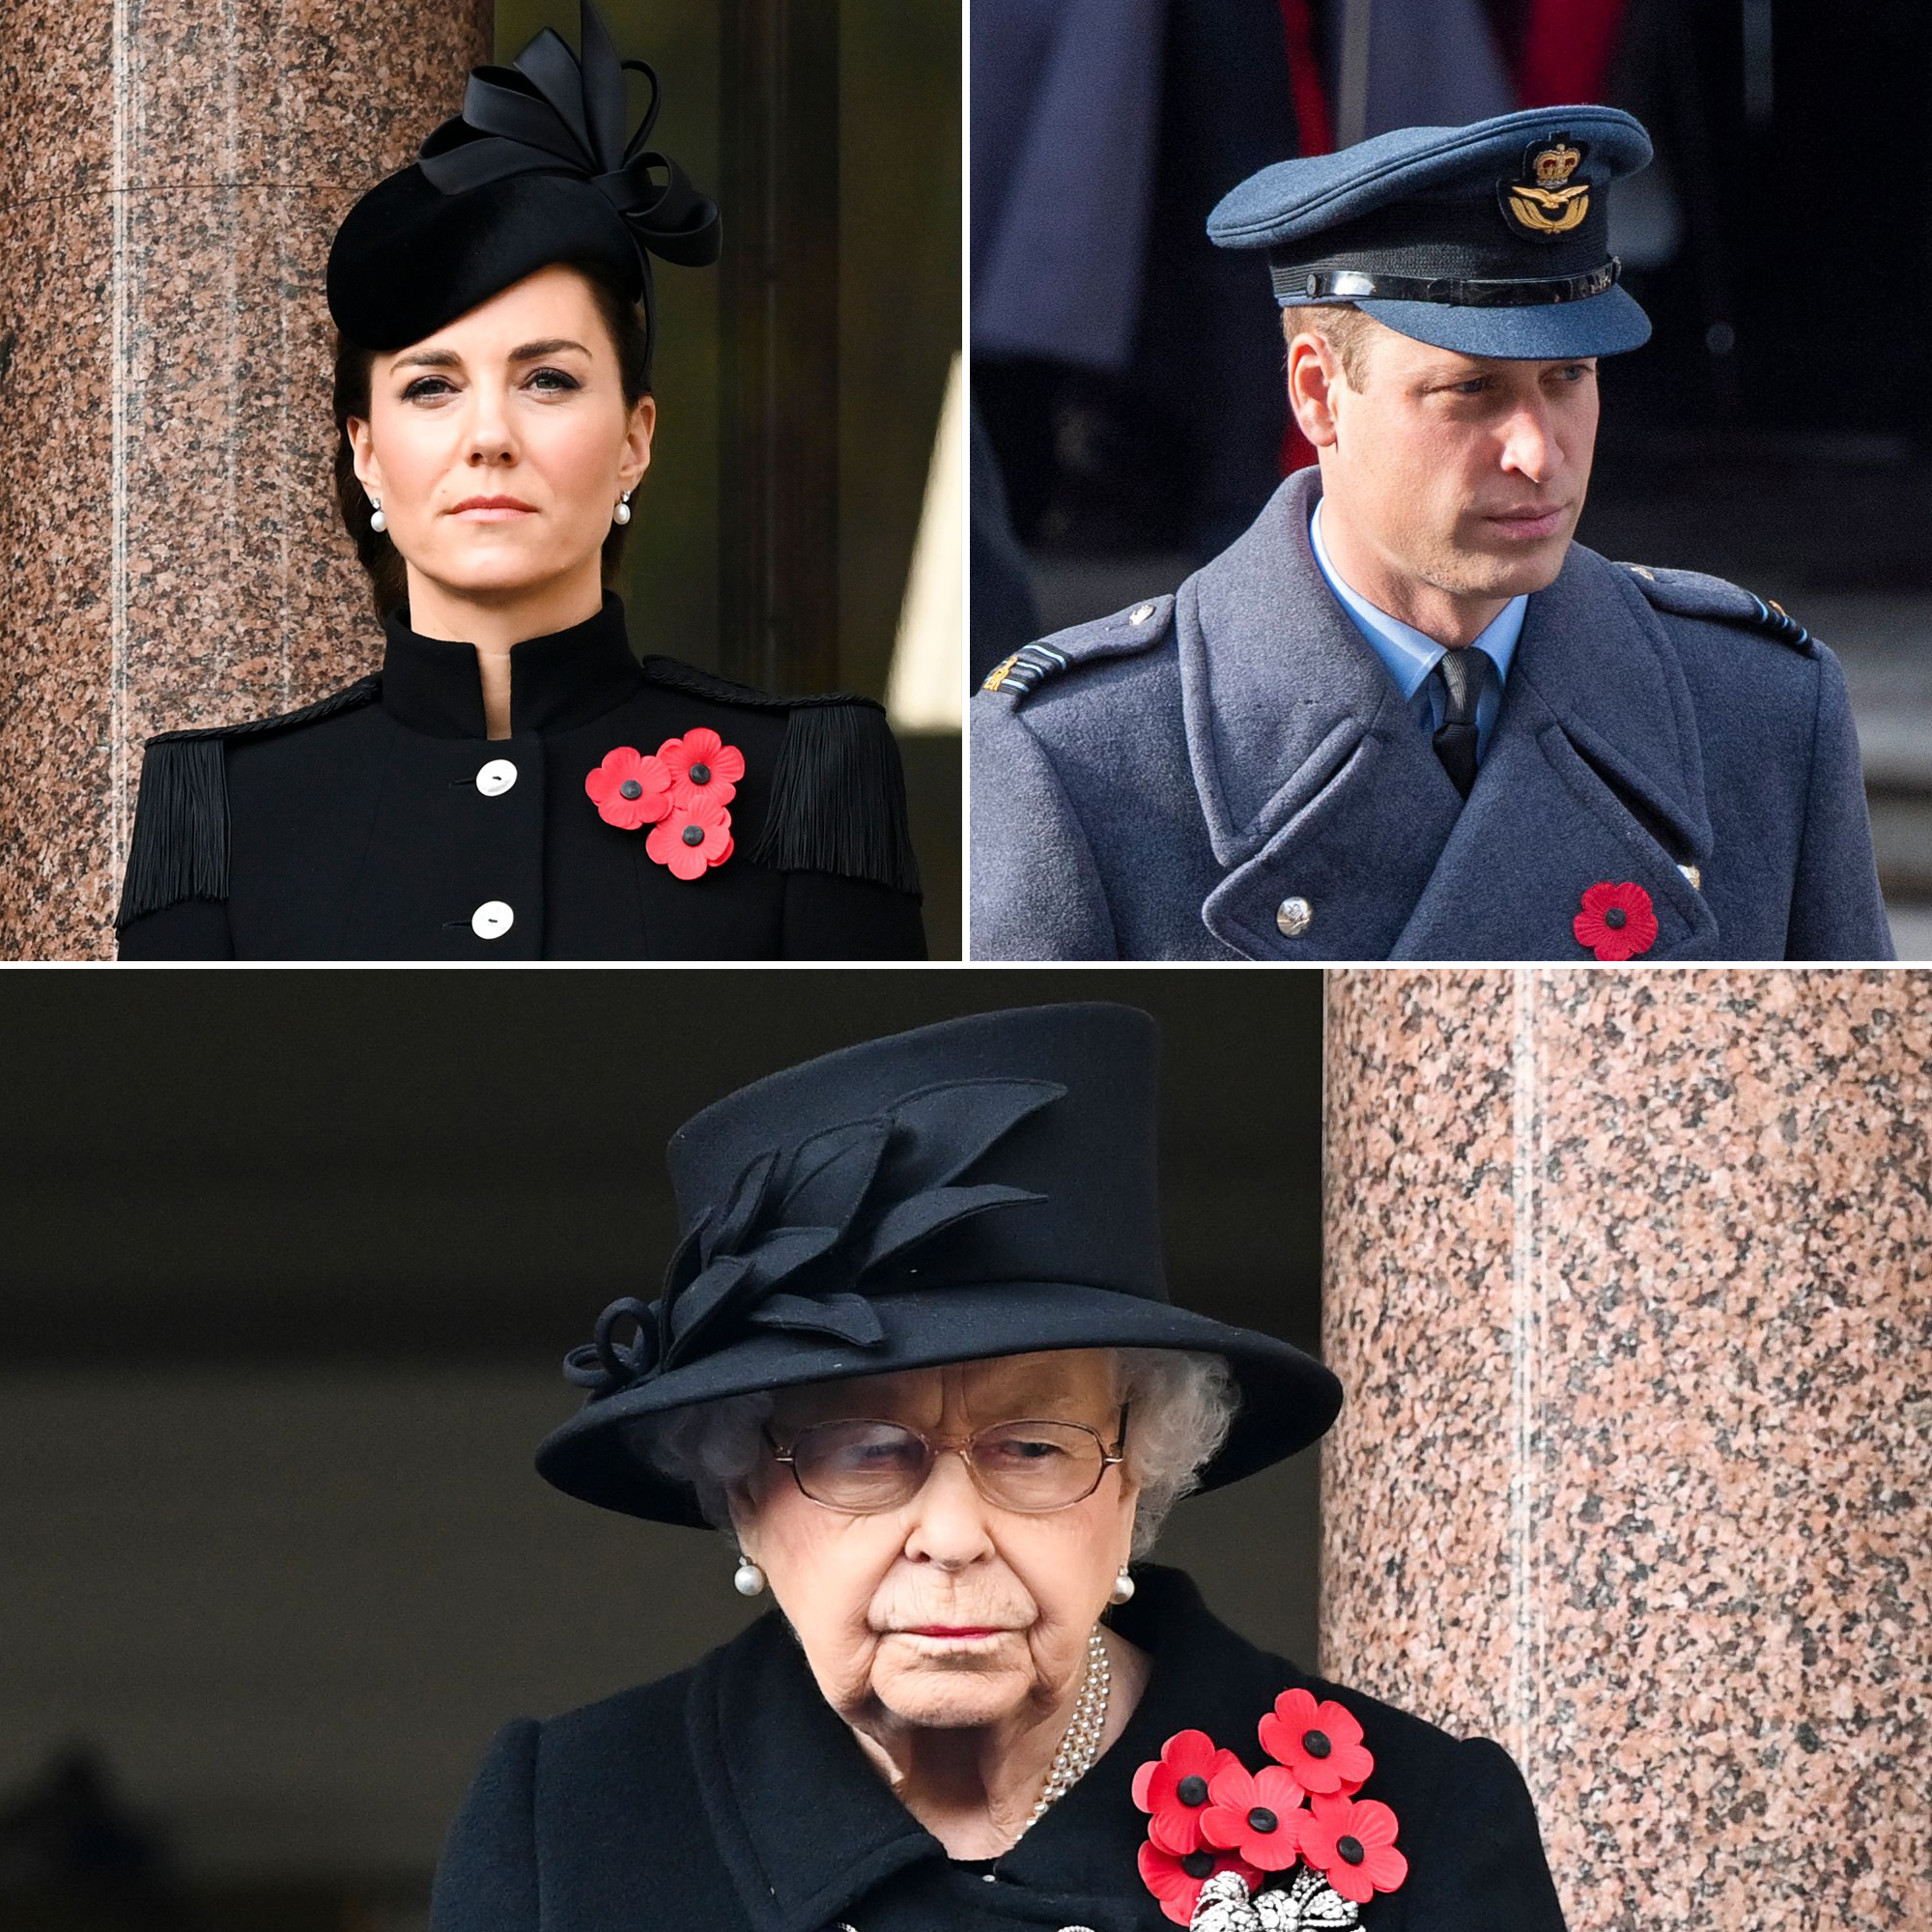 Duchess-Kate-Prince-William-and-More-Royals-Join-Queen-Elizabeth-II-at-Remembrance-Day-Ceremony-Feature.jpg